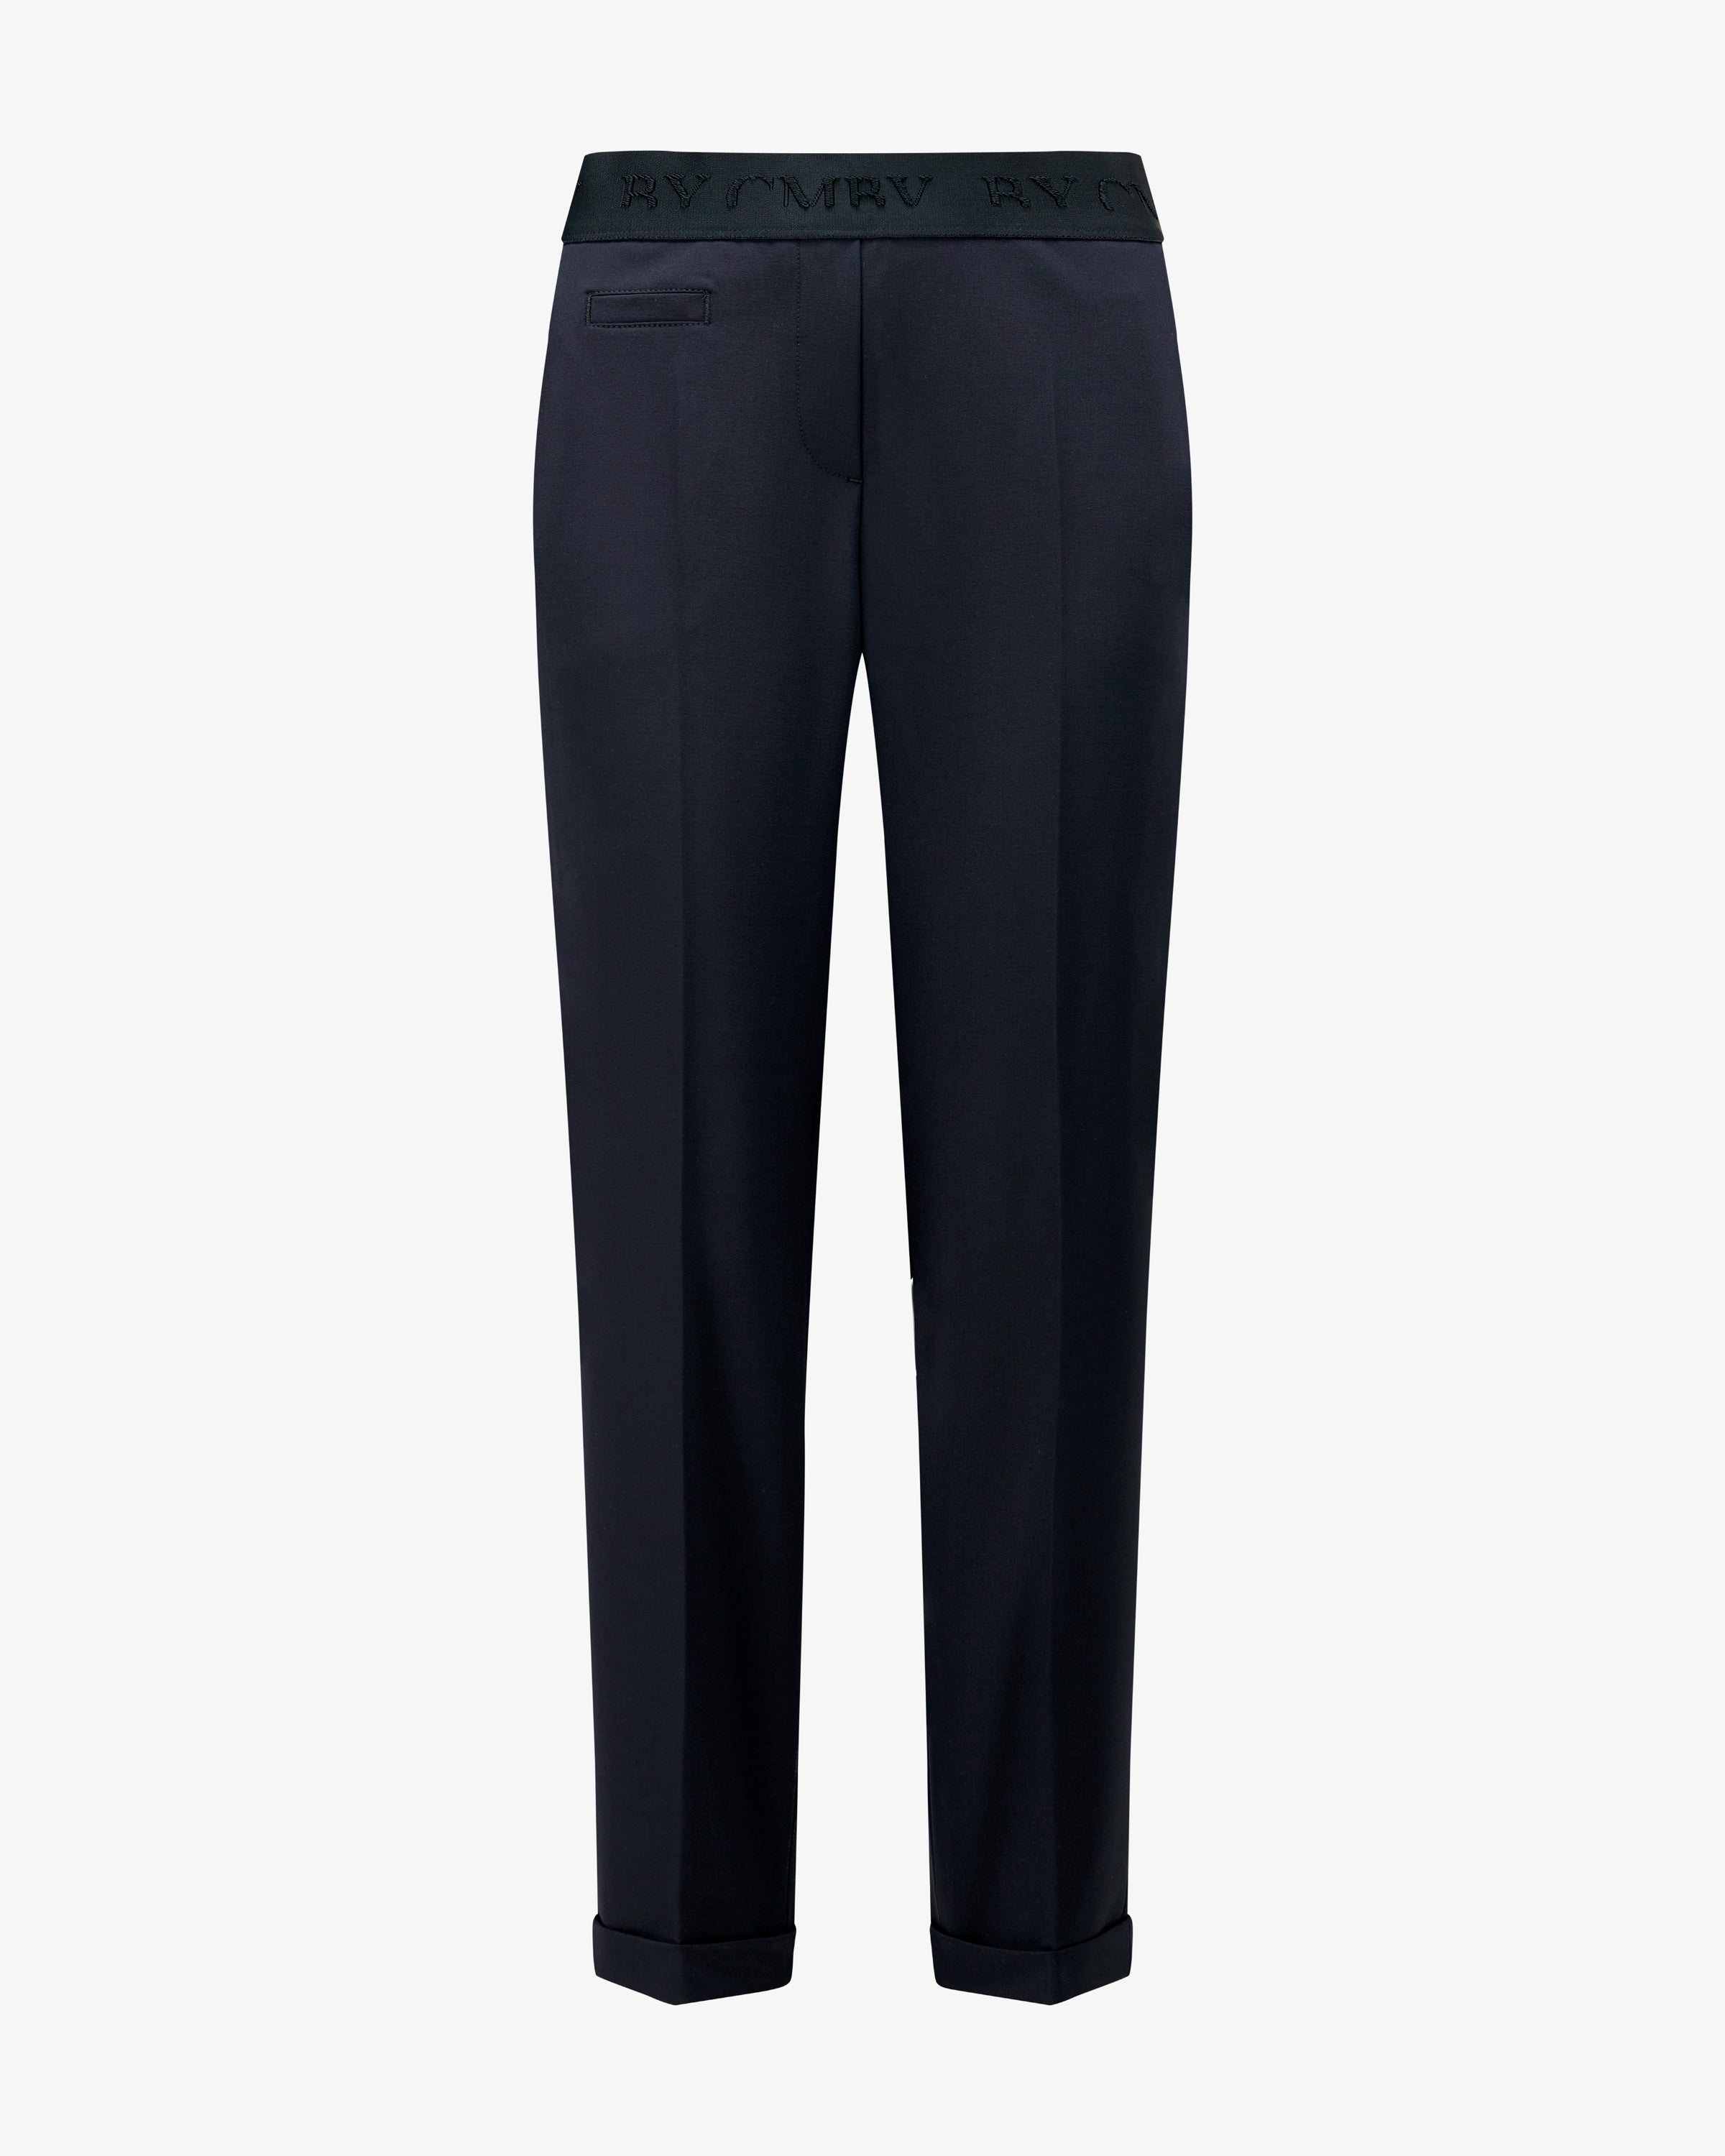 Cambio pant in Navy Kim